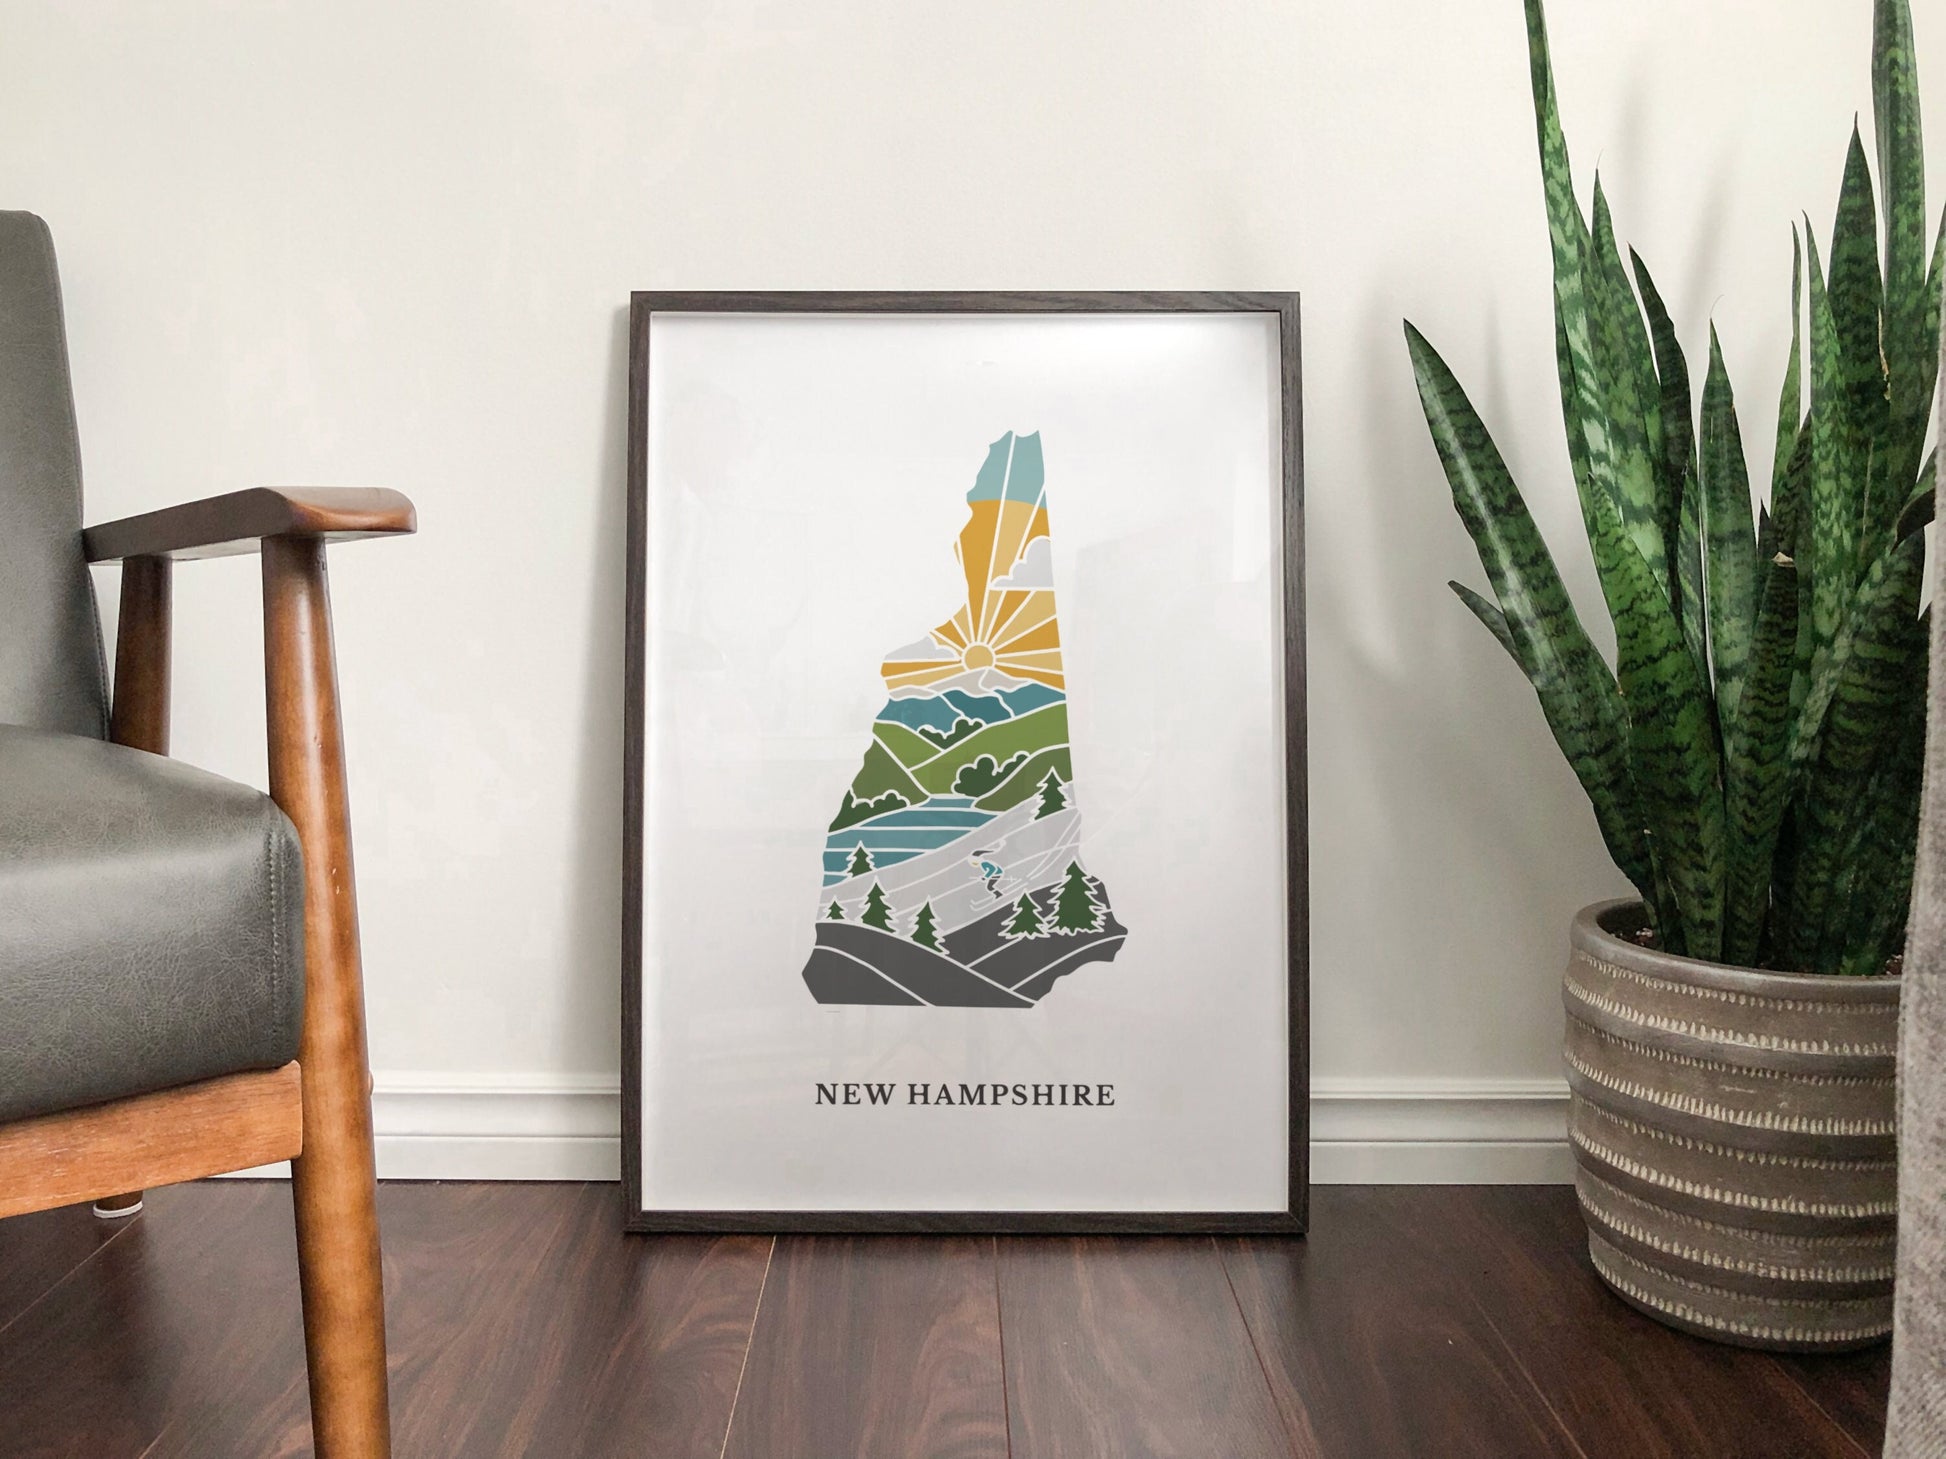 New Hampshire Physical Art Print | State Wall Art | 5x7, 8x10, 11x14, 16x20 Archival Art Print | New Hampshire Illustrated Poster